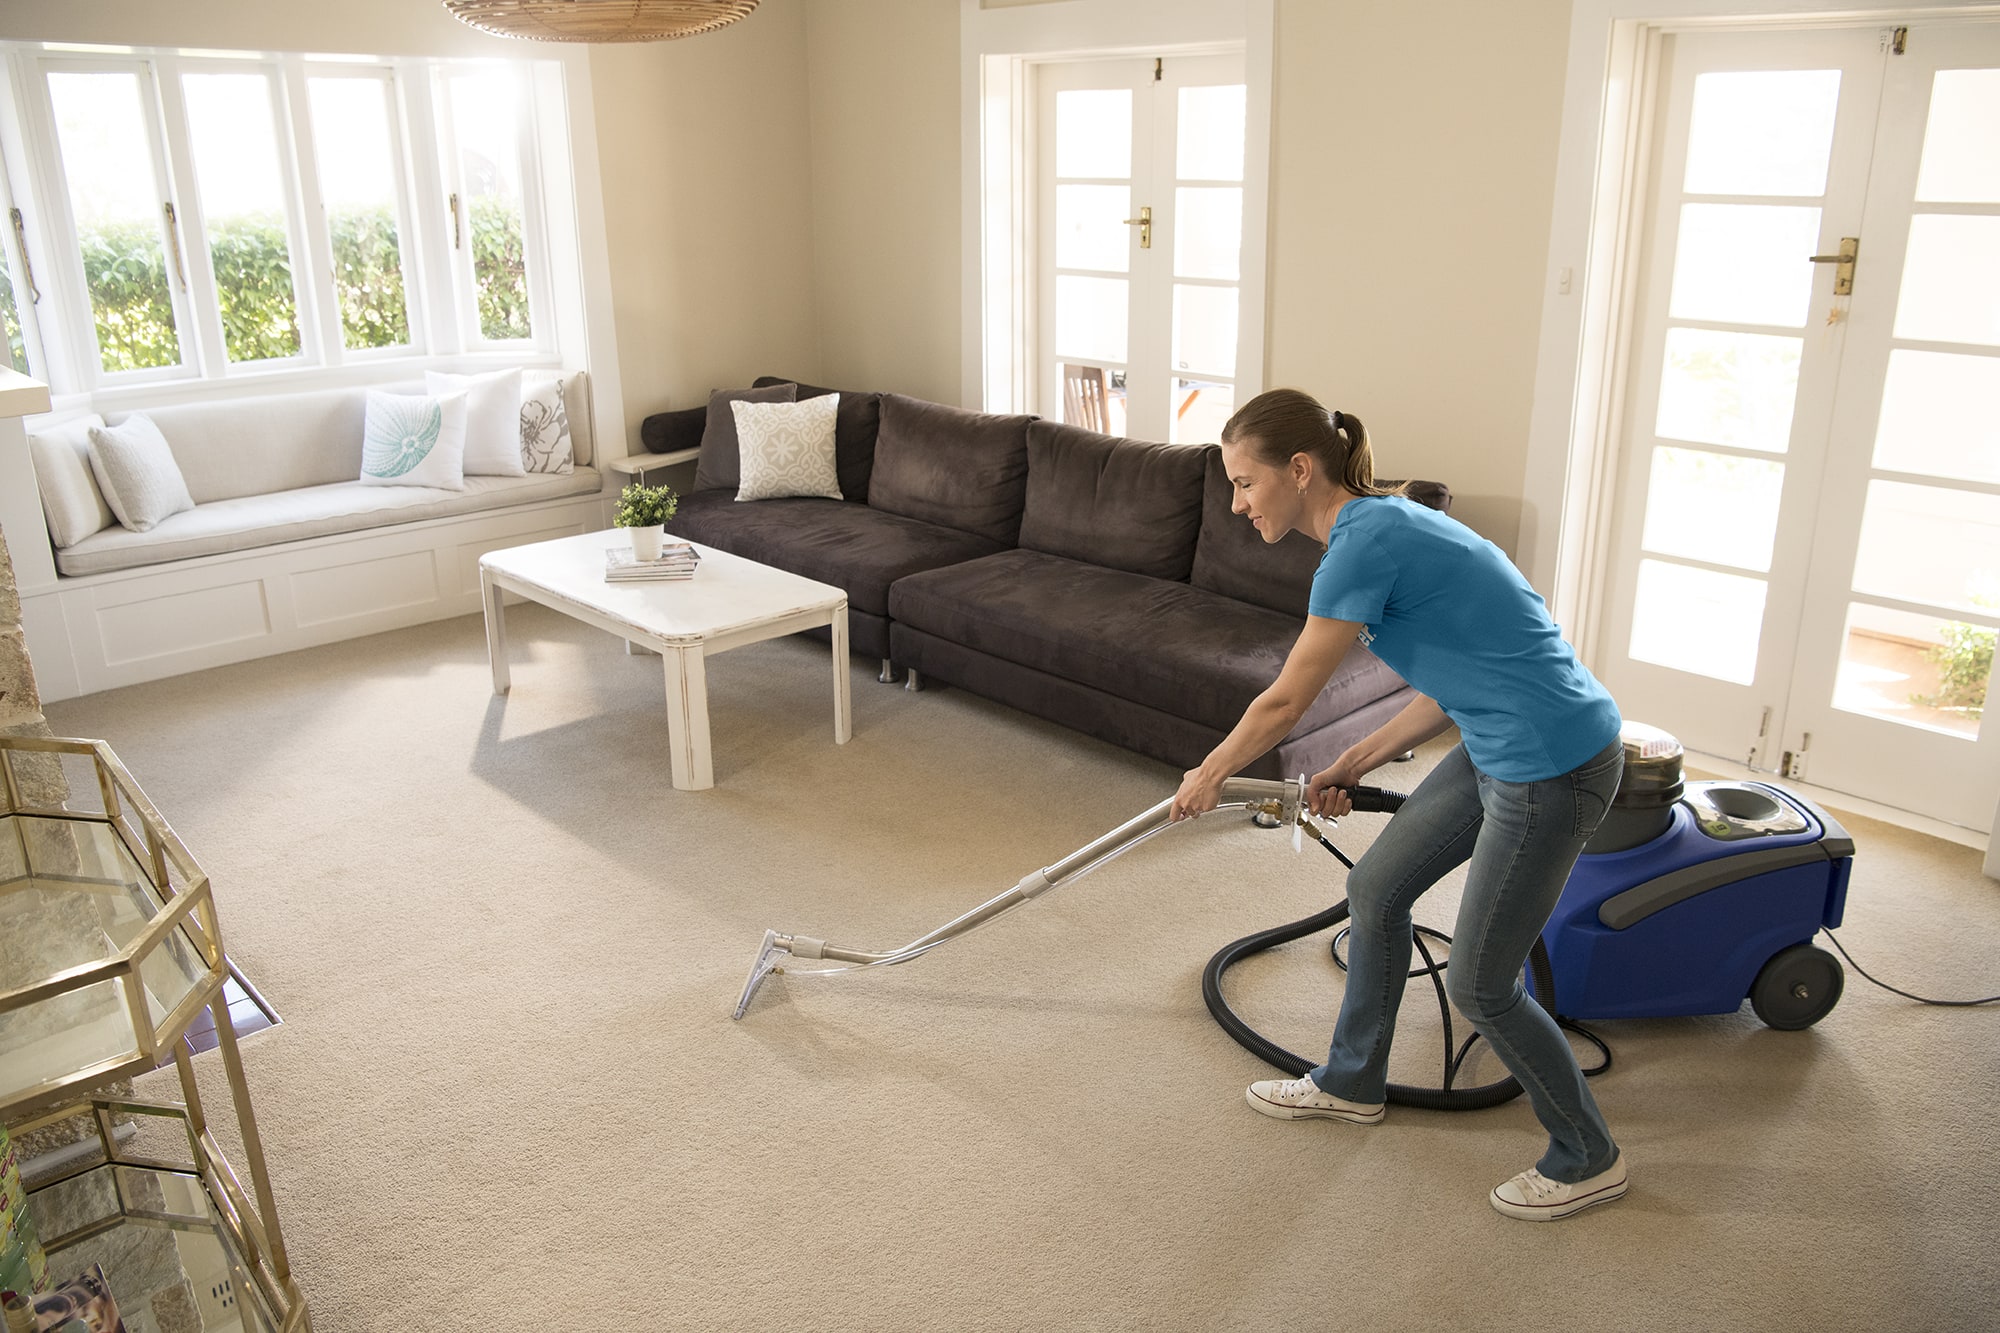 List of Cleaning Tools that Every Home Should Have